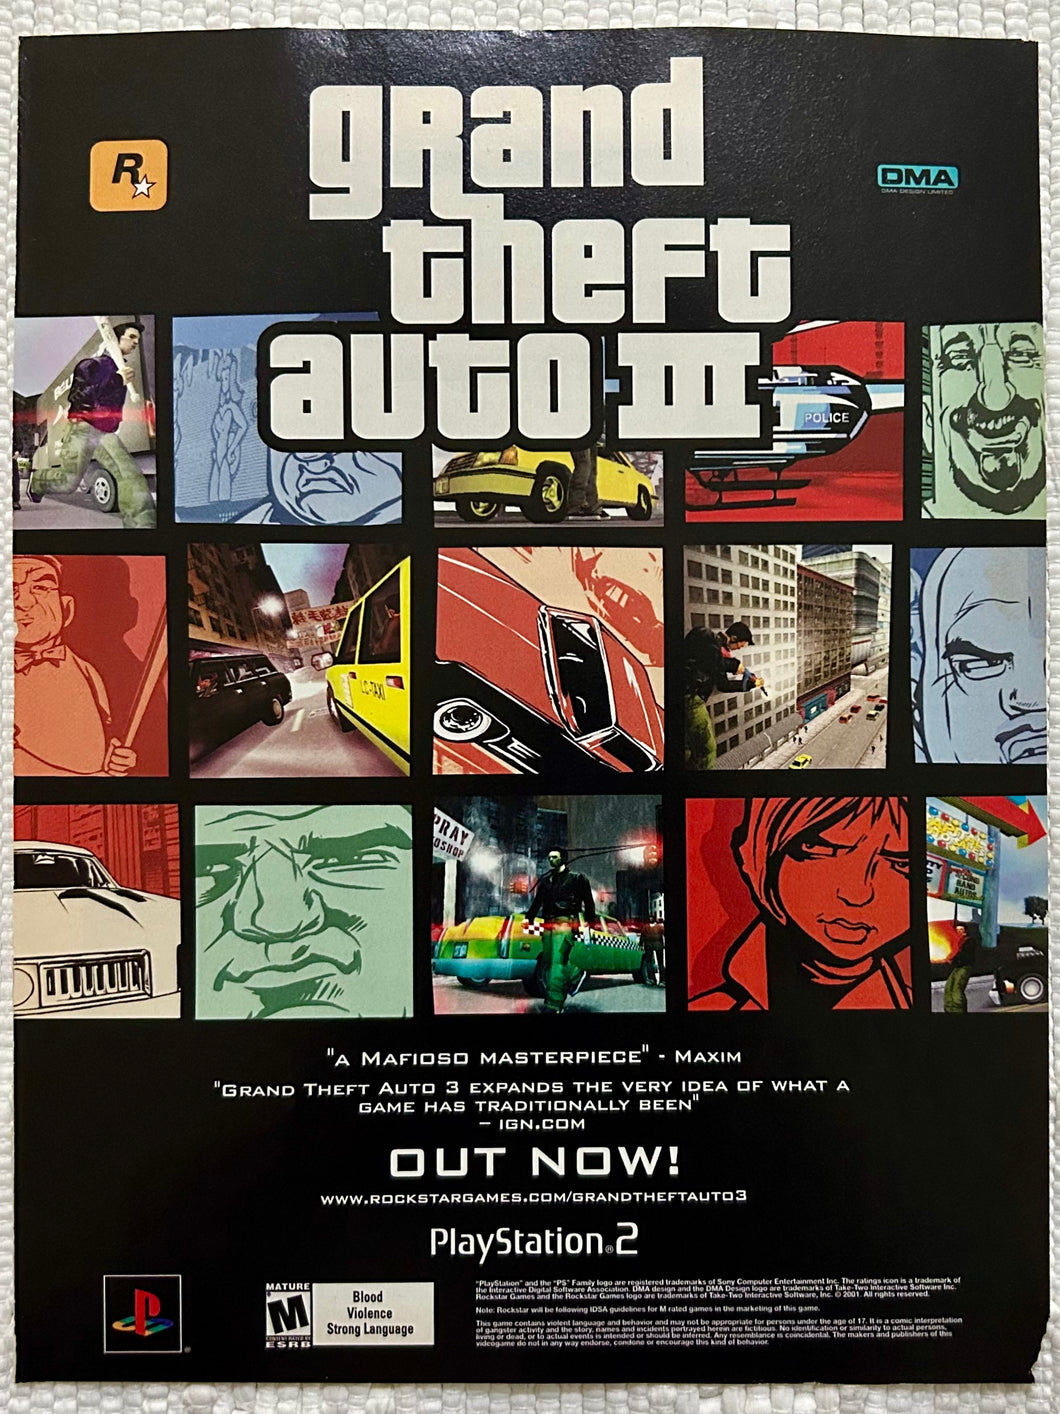 Grand Theft Auto III - PS2 - Original Vintage Advertisement - Print Ads - Laminated A4 Poster